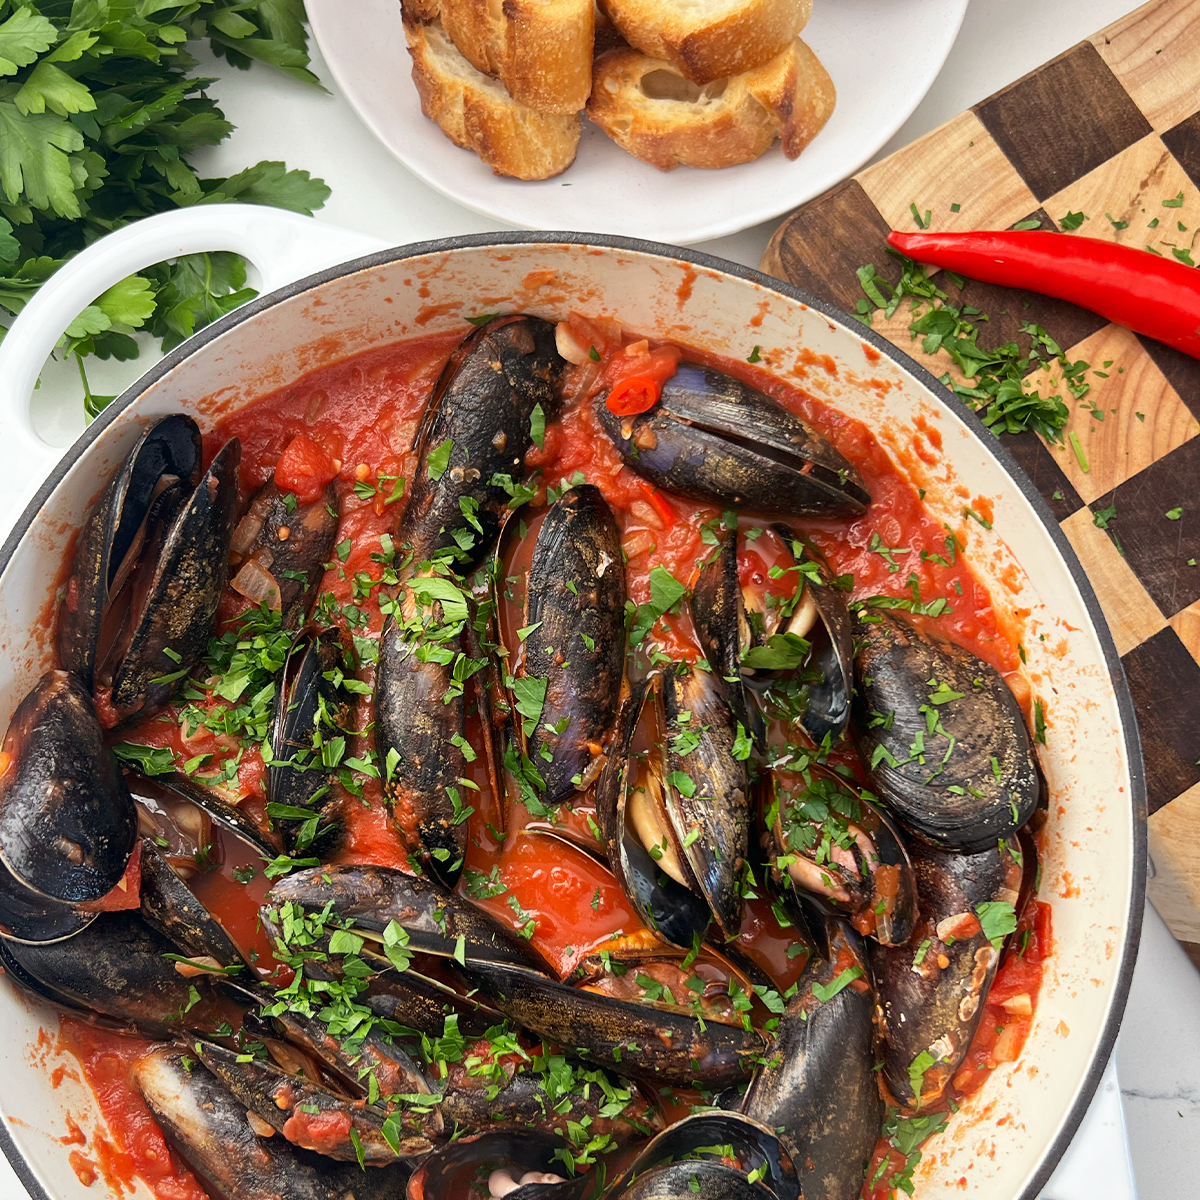 Mussels in a Spicy Tomato Sauce 